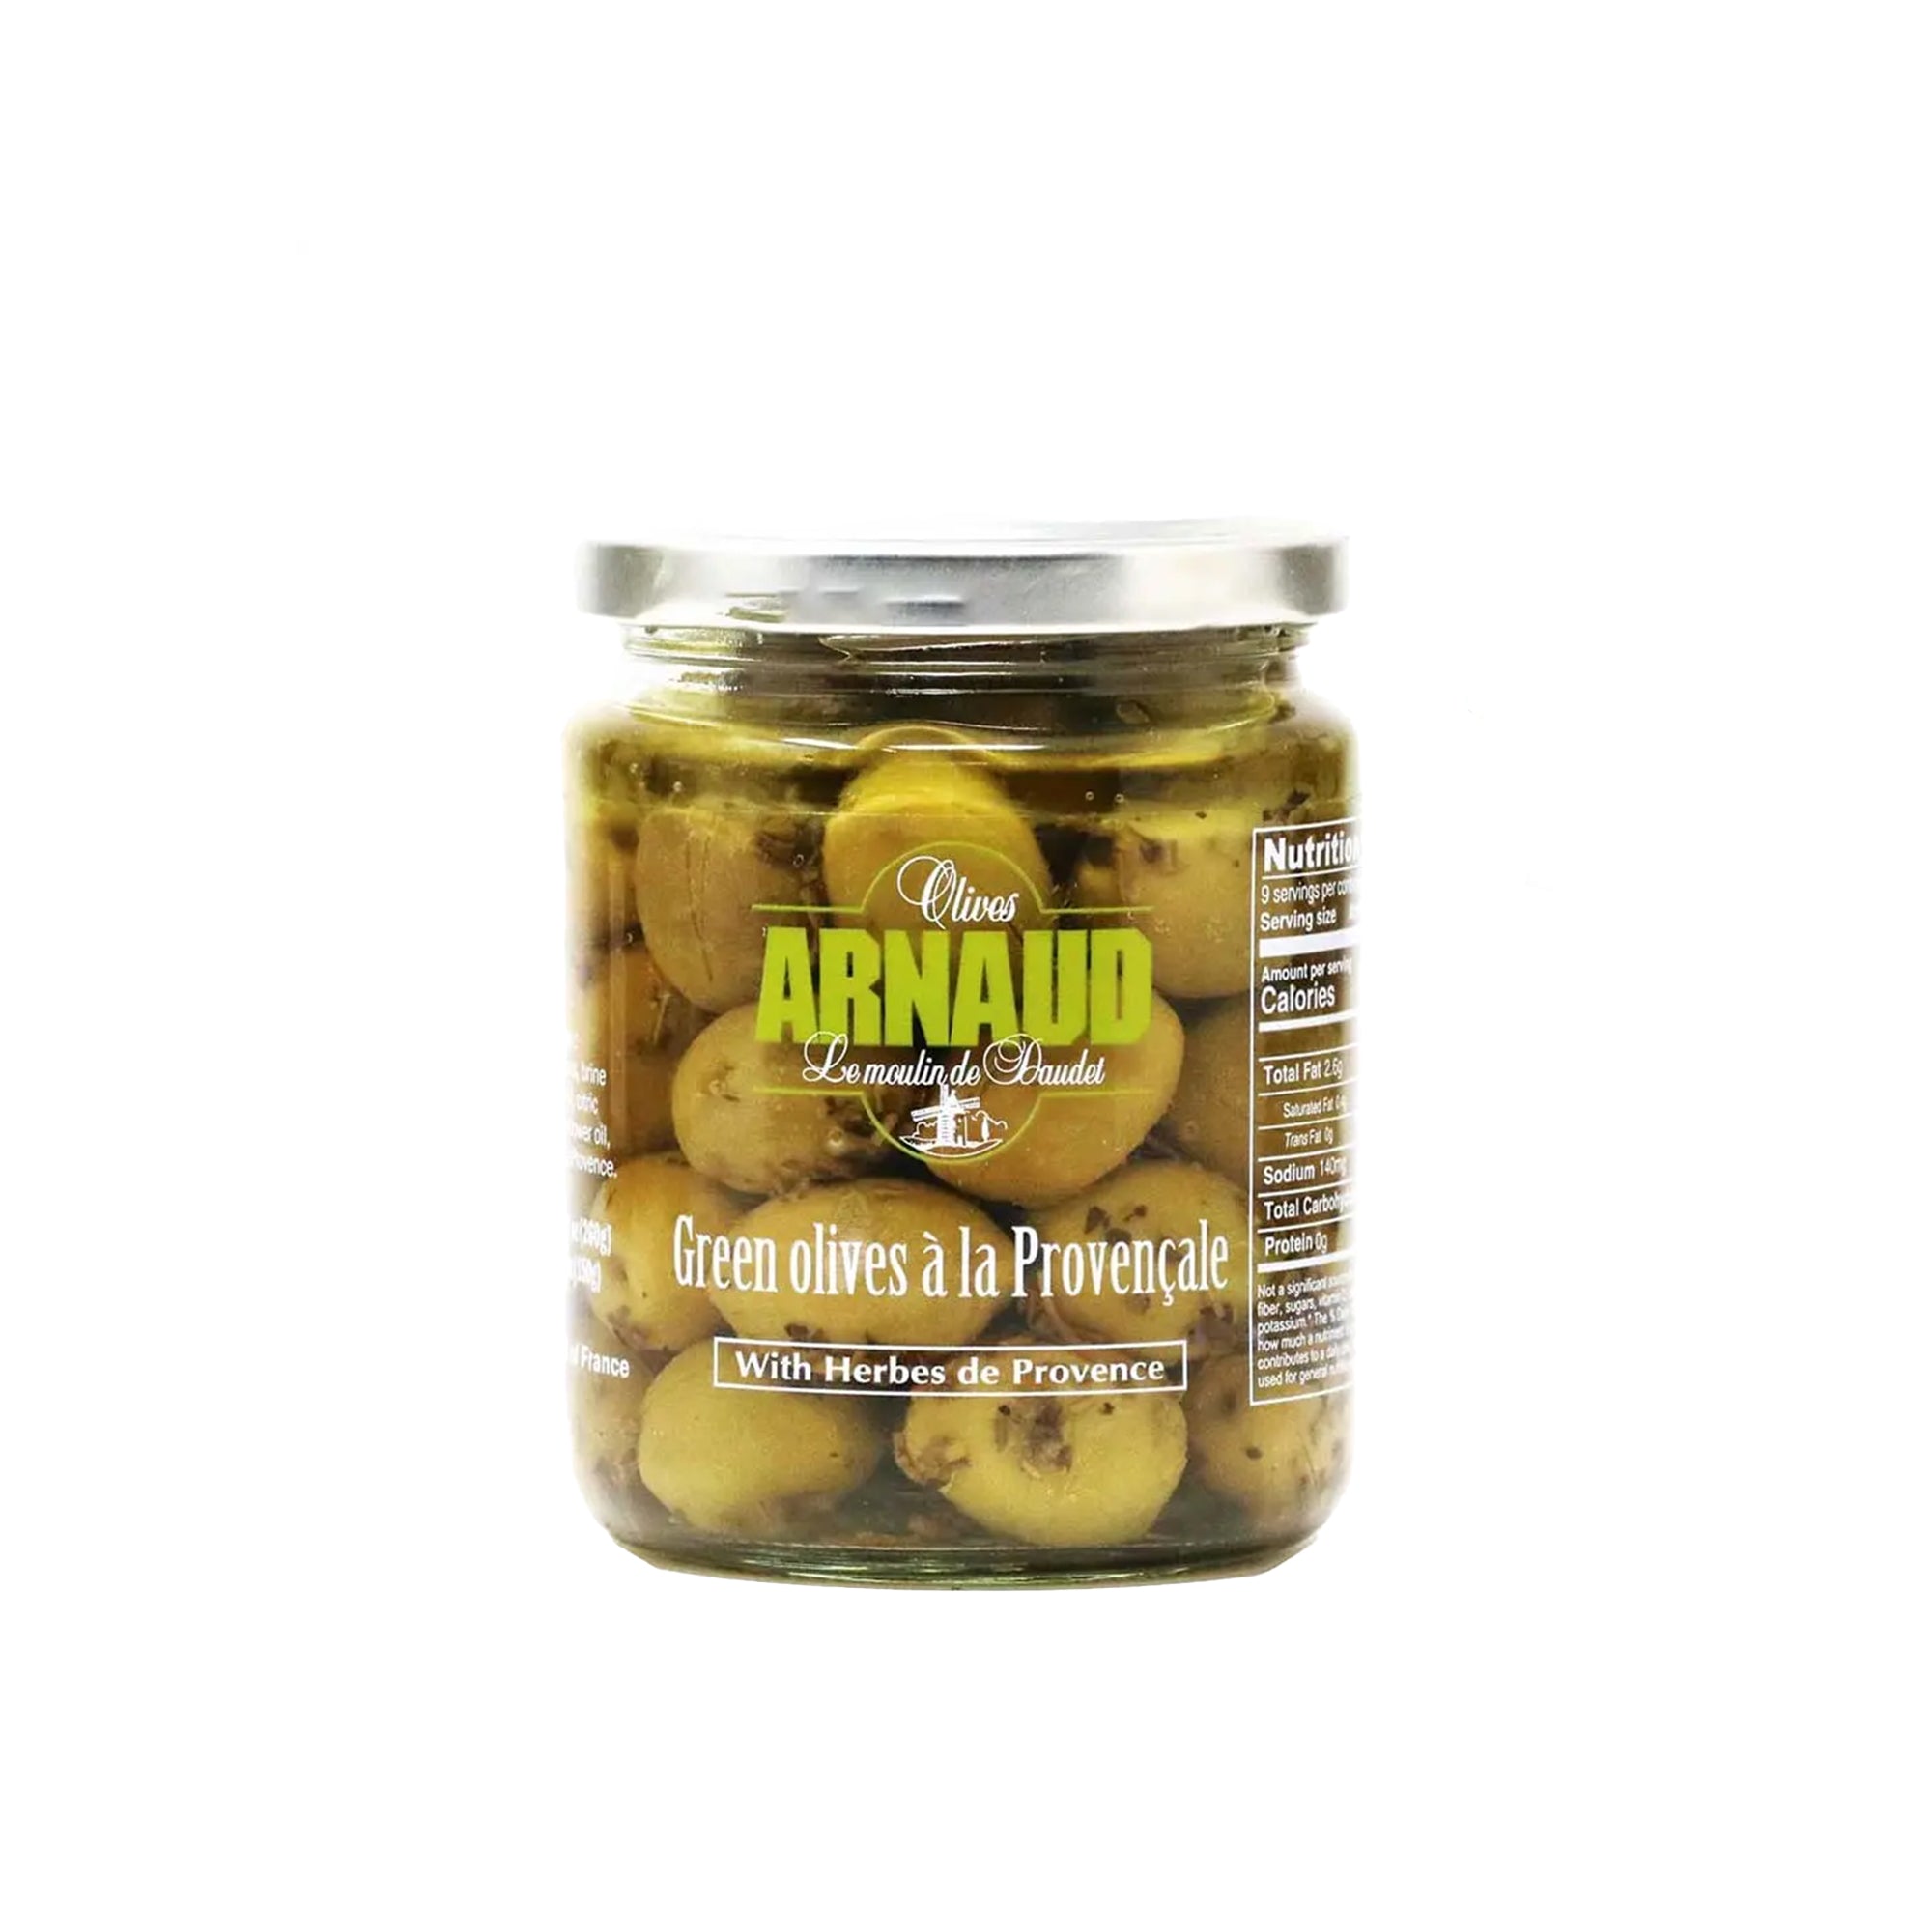 Whole Green Olives with Herbs of Provence, 9.2oz